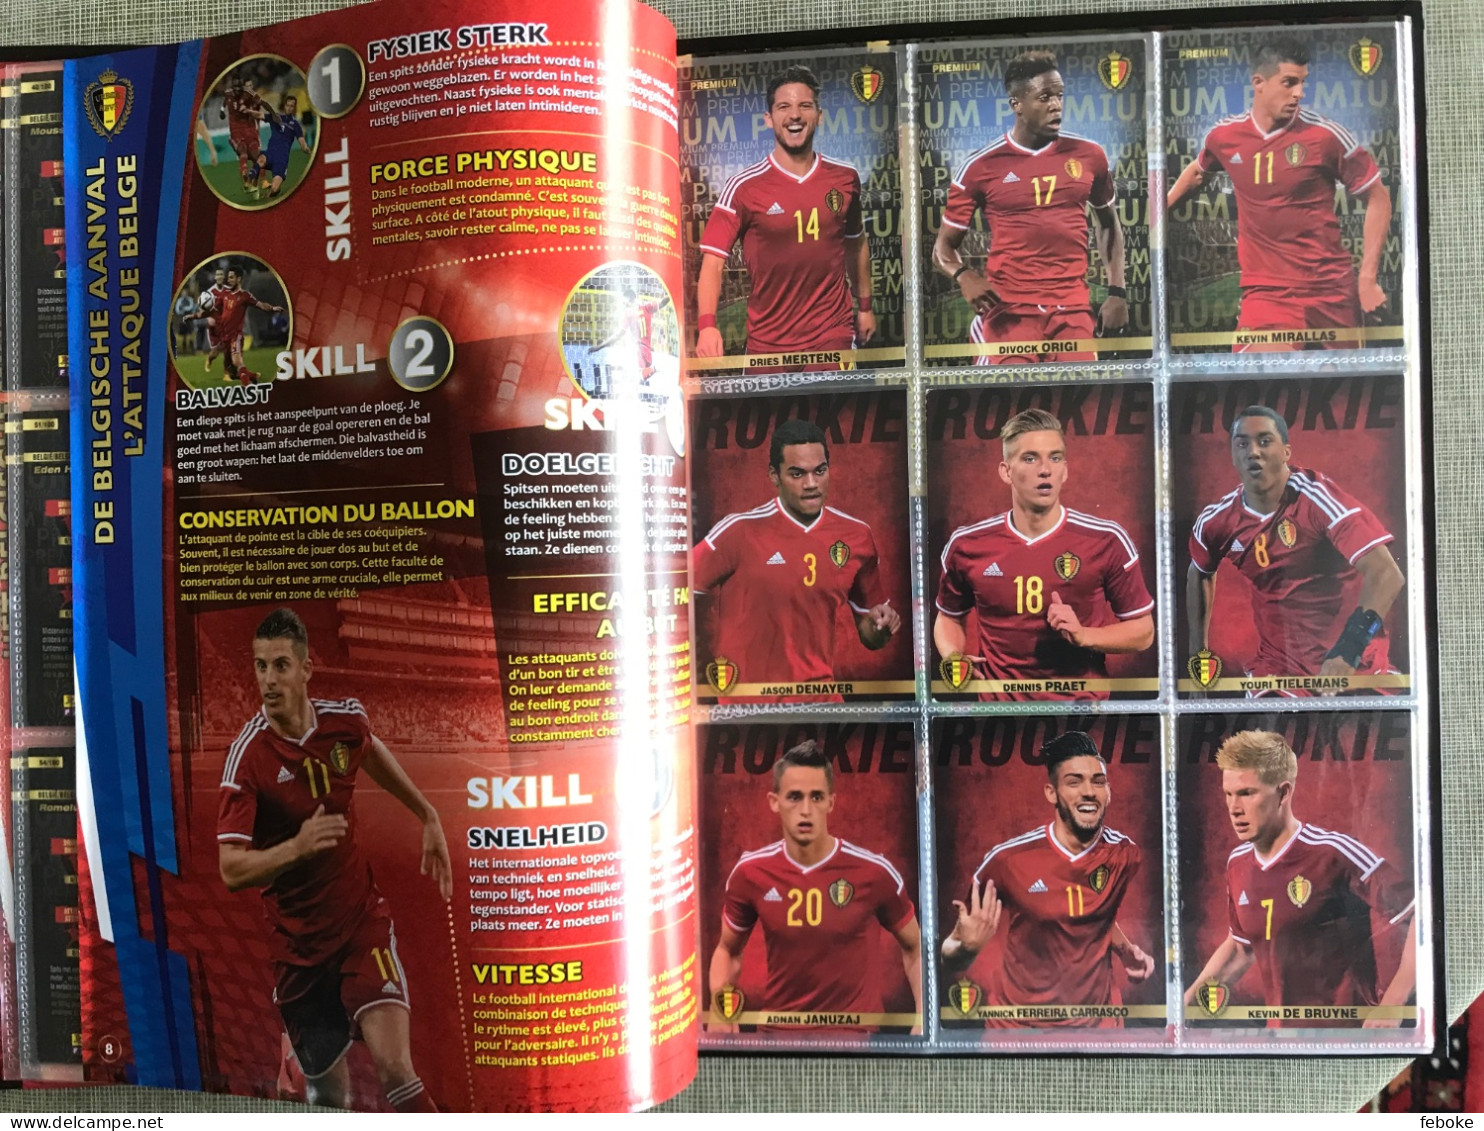 TOUSENSEMBLE ROAD TO FRANCE PANINI FAMILY CARREFOUR 2015 BELGIAN RED DEVILS - Andere & Zonder Classificatie